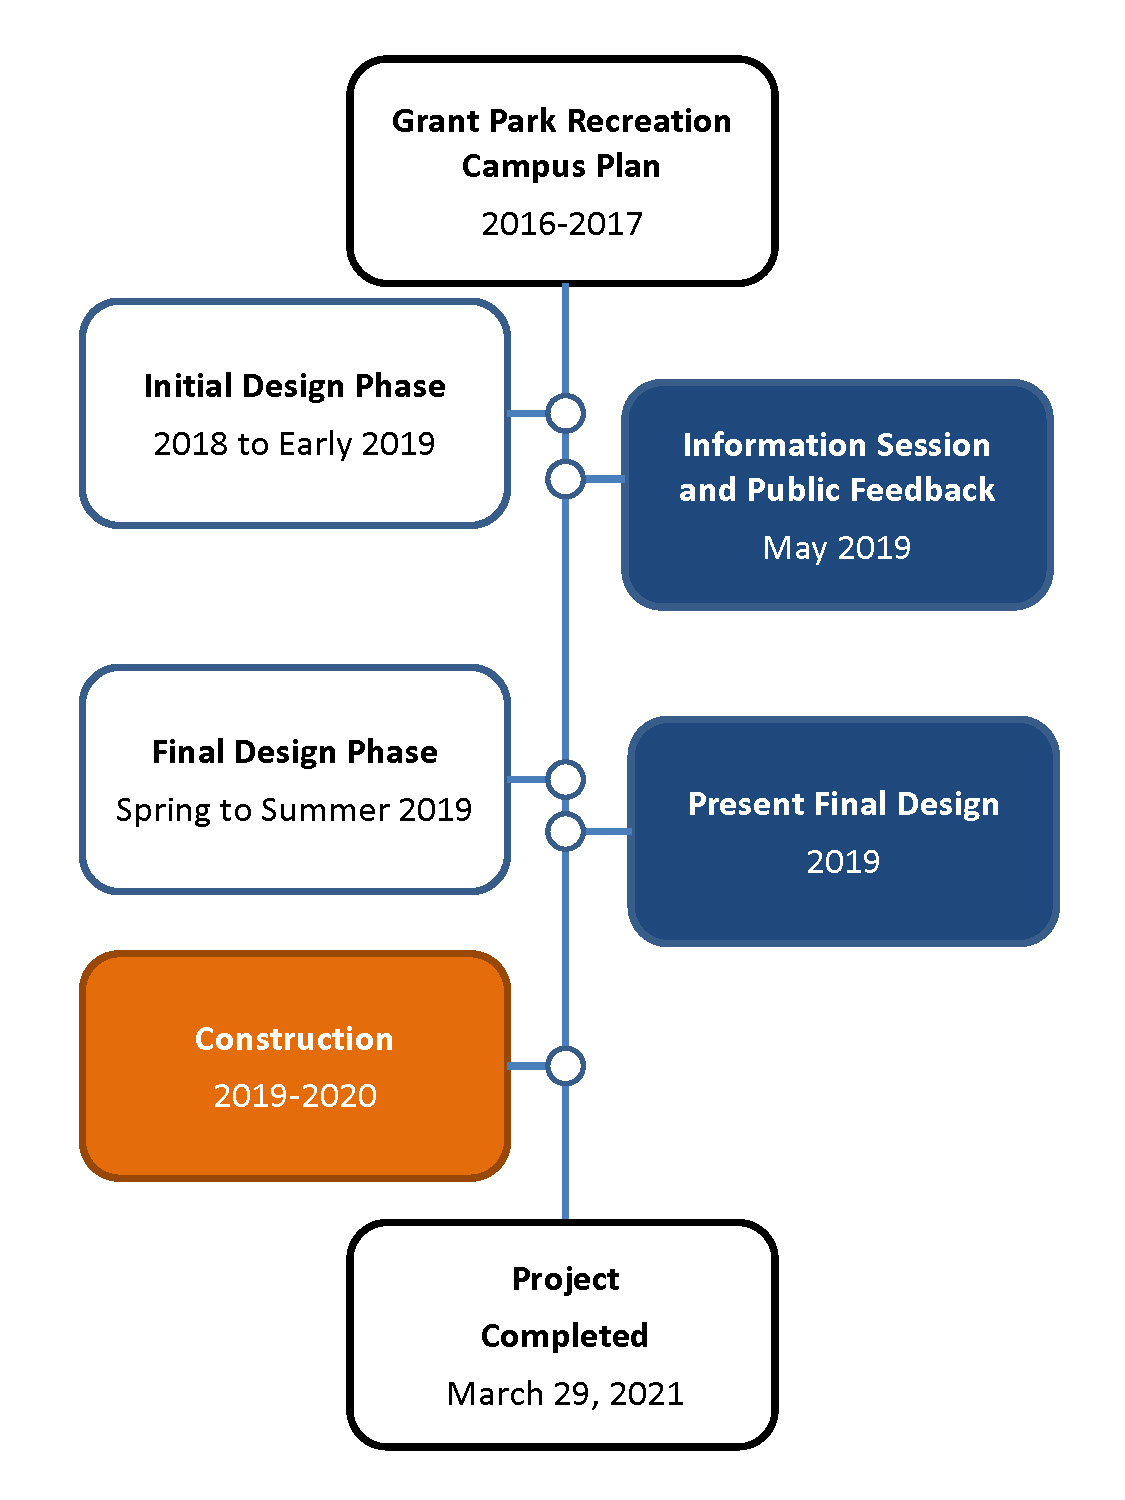 Grant Park Recreation Campus Plan 2016-2017 Initial Design Phase 2018 to Early 2019 Information Session and Public Feedback May 2019 Present Final Design 2019 Construction 2019-2020 Project Completed 2020